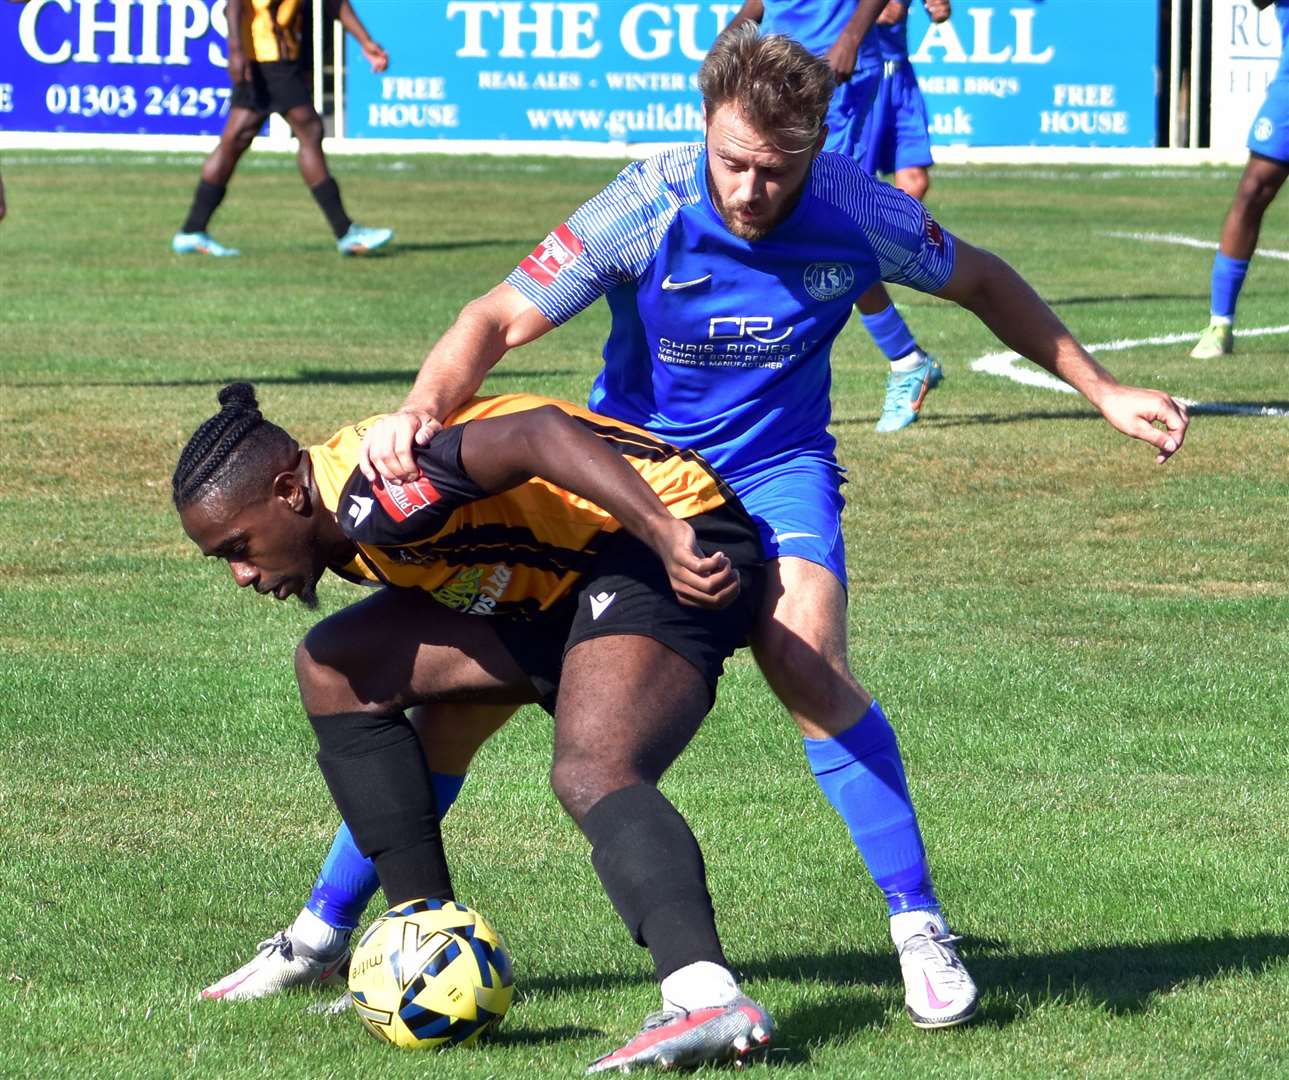 Ira Jackson Jr under pressure for Folkestone against Herne Bay's Jack Parter during their 2-1 win on Monday. Picture: Randolph File